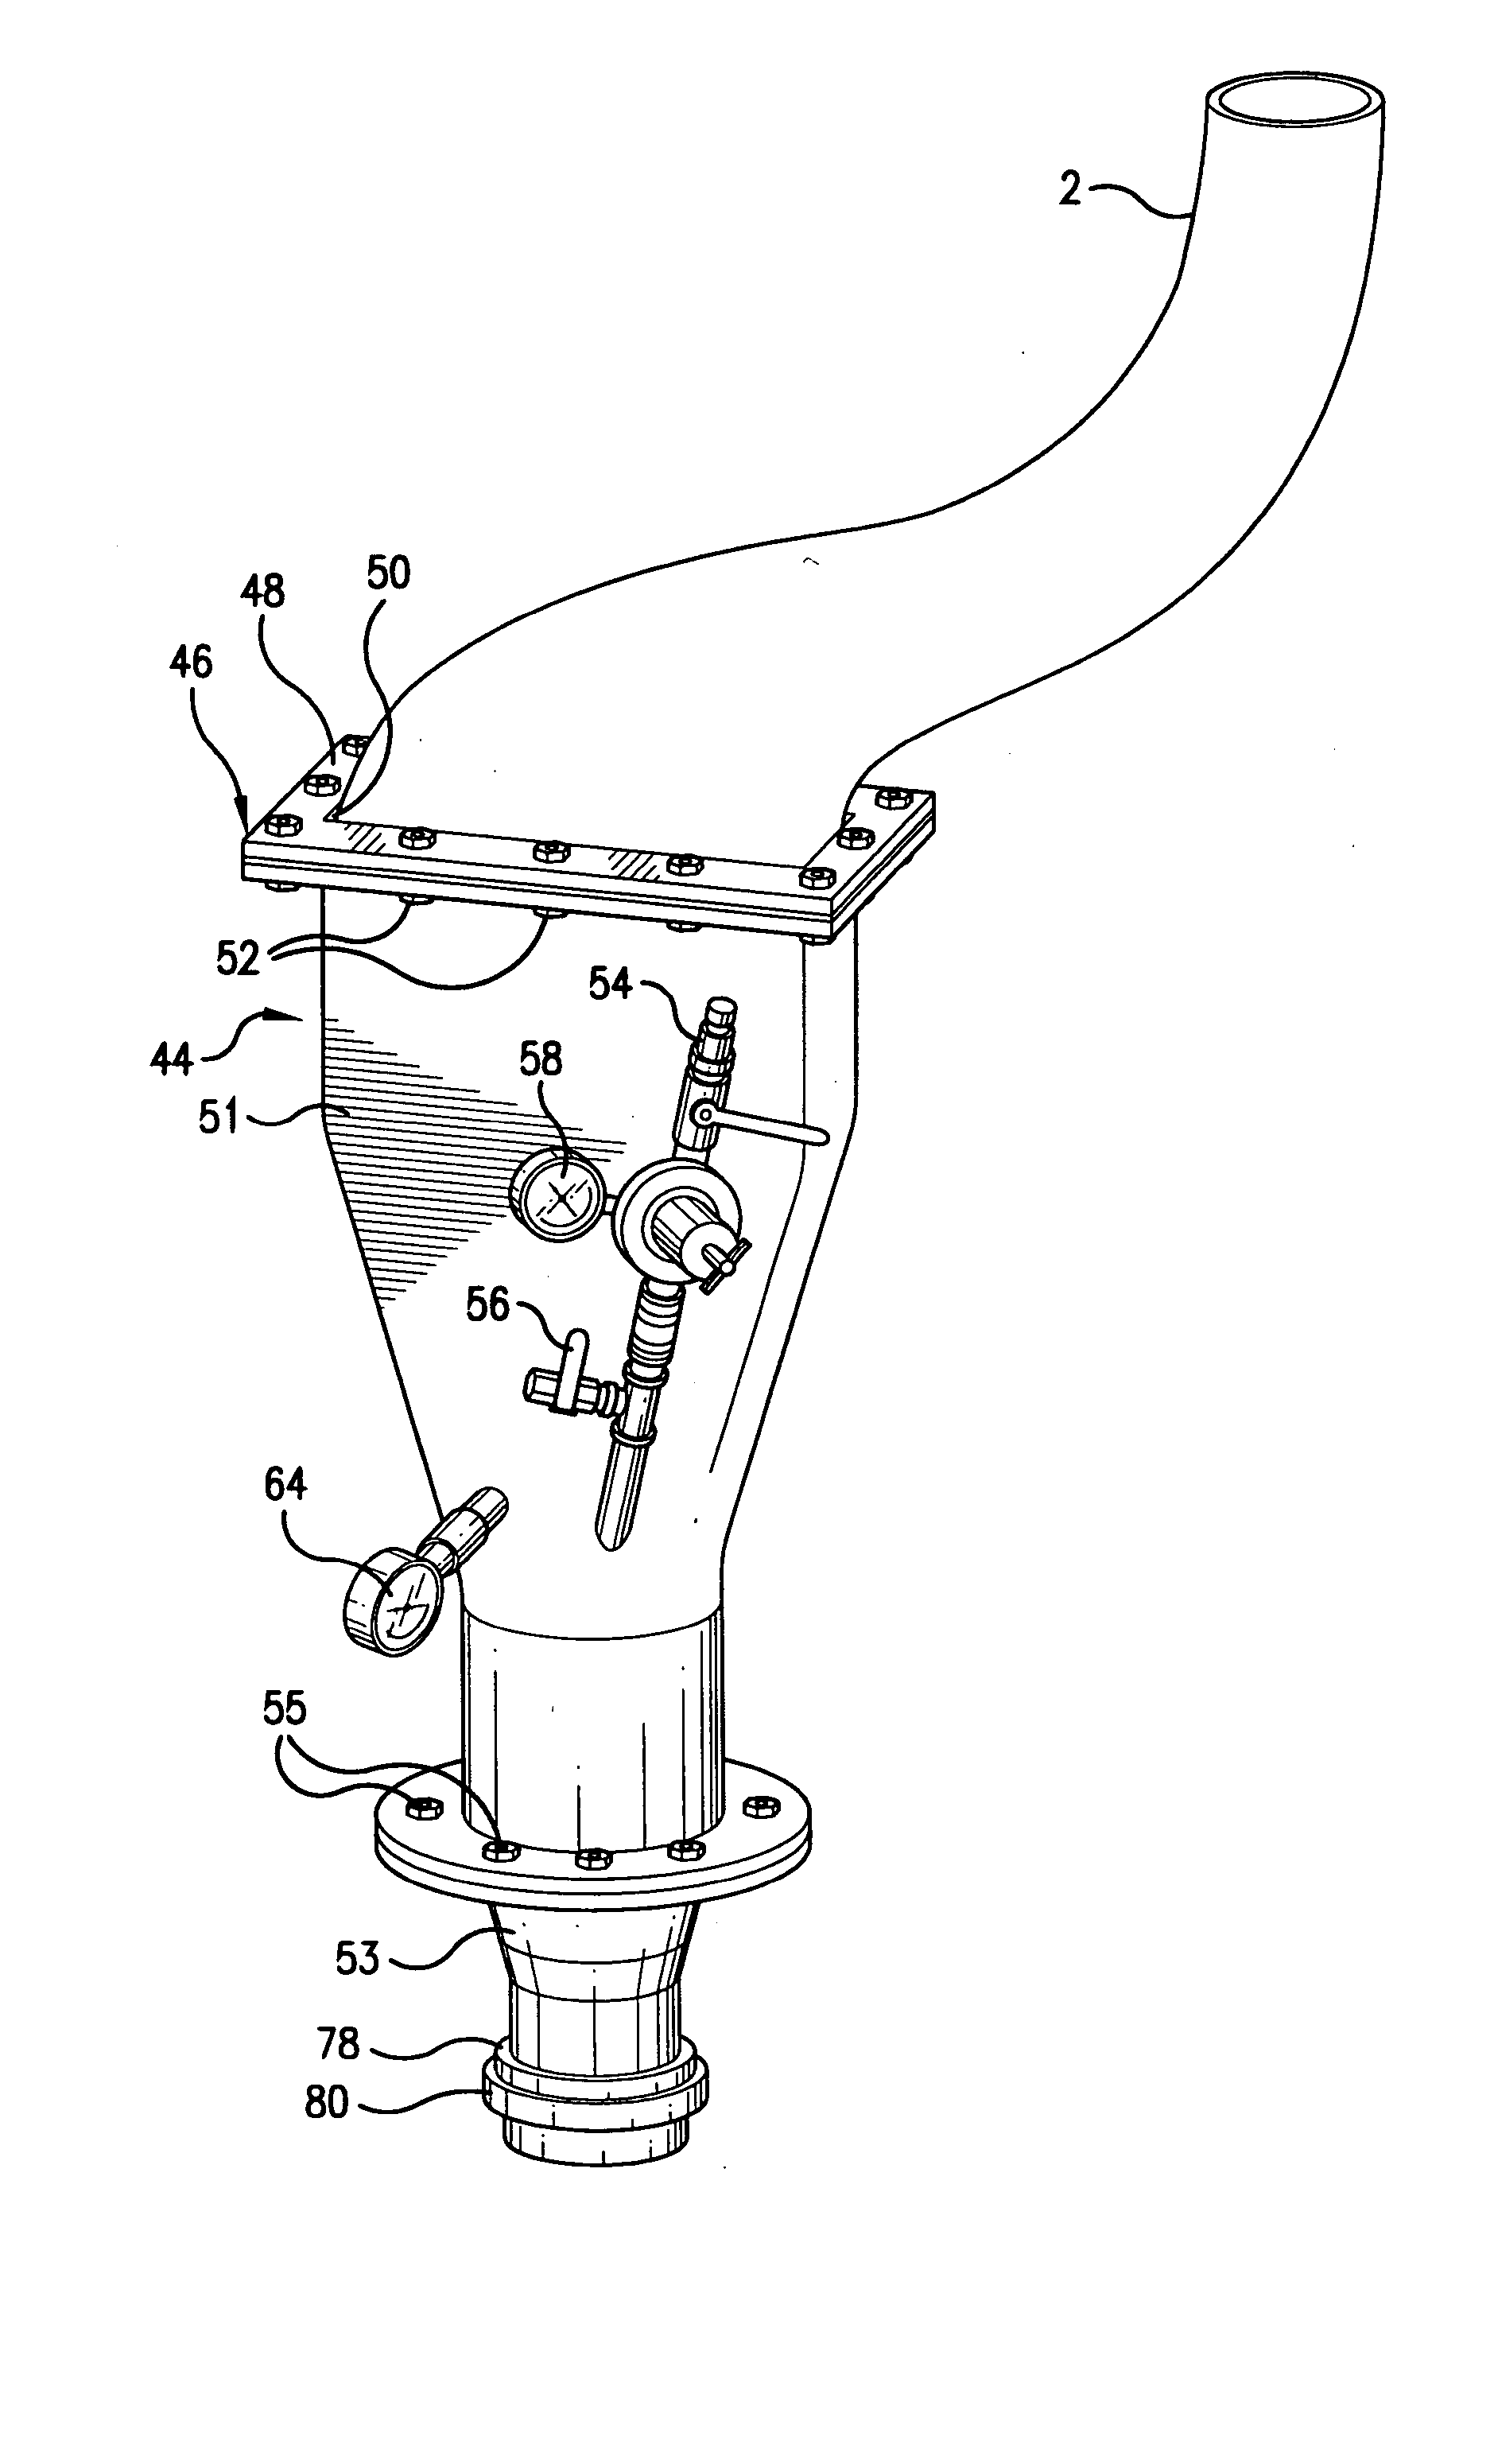 Tube inverting device and method for using same